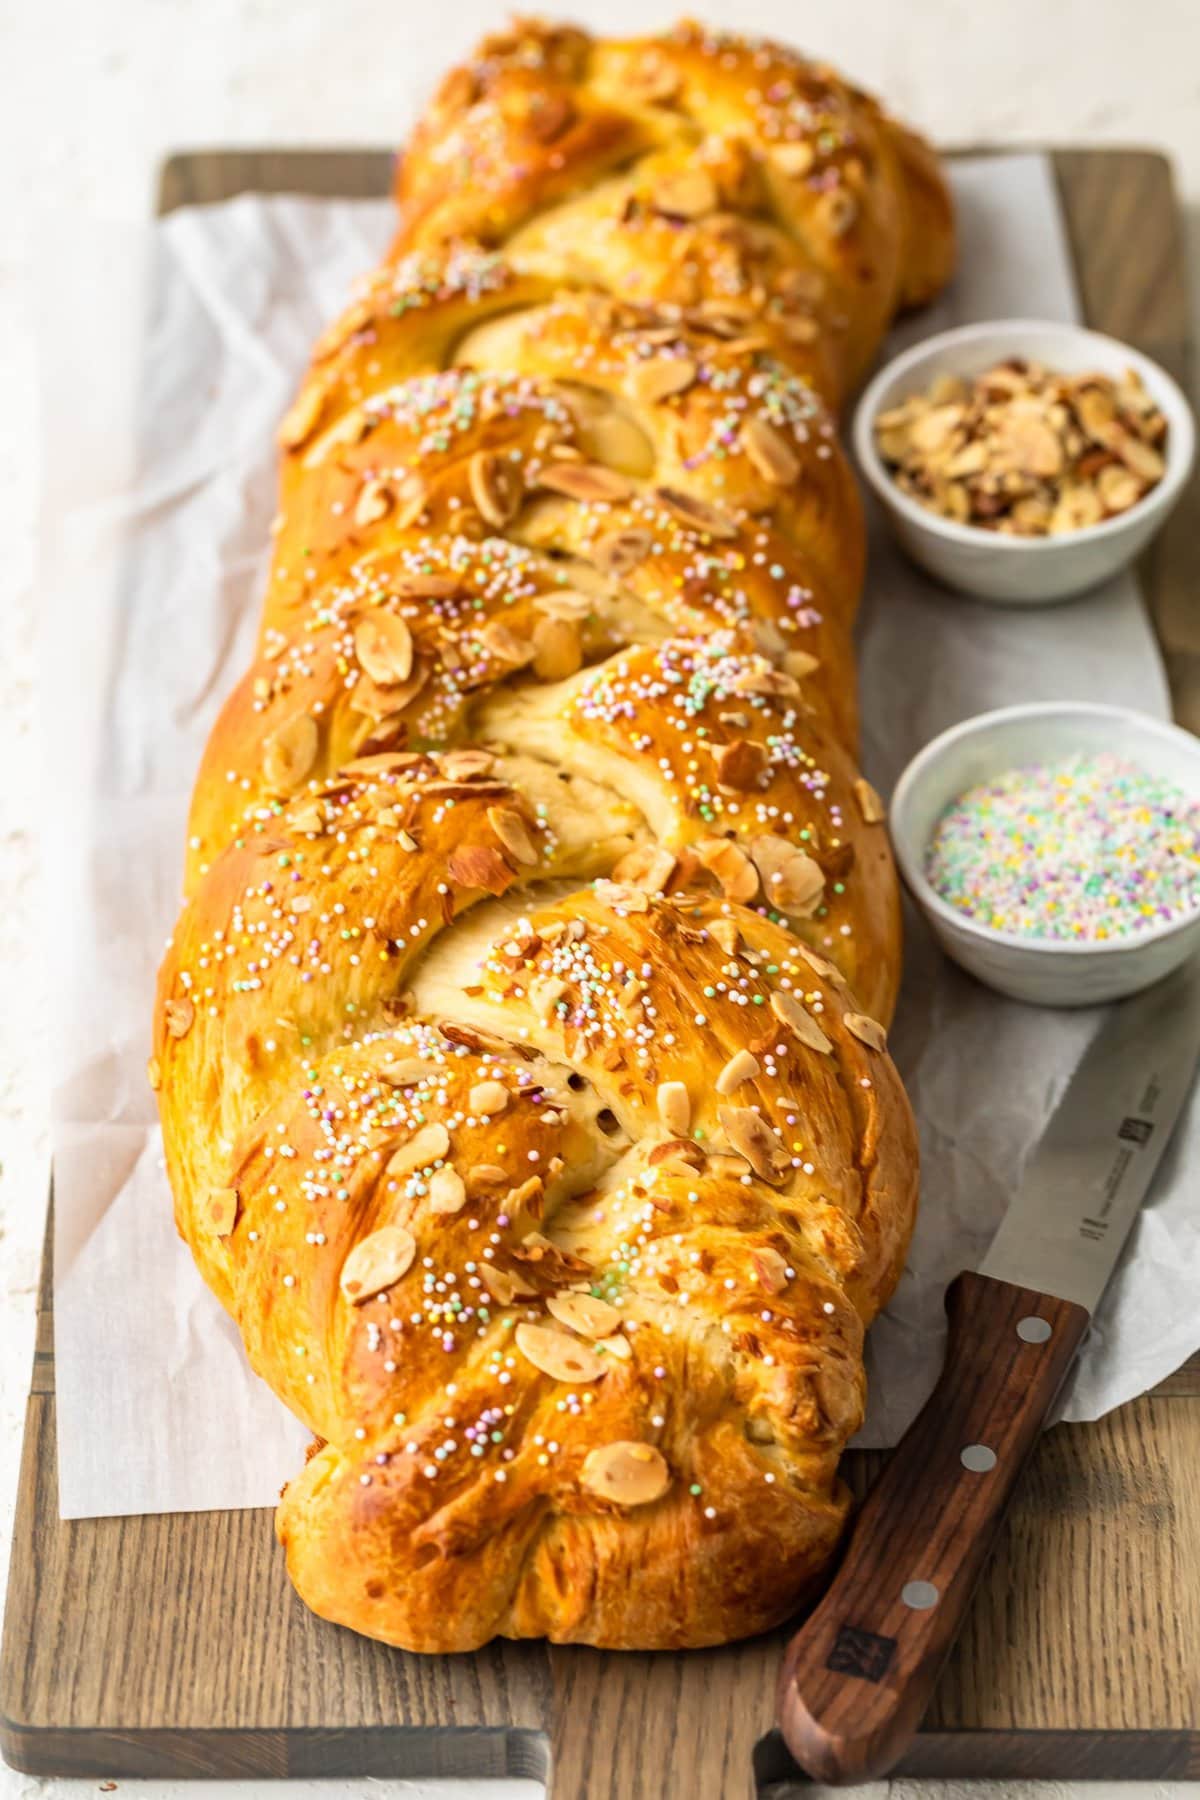 a loaf of braided bread on a wooden cutting board